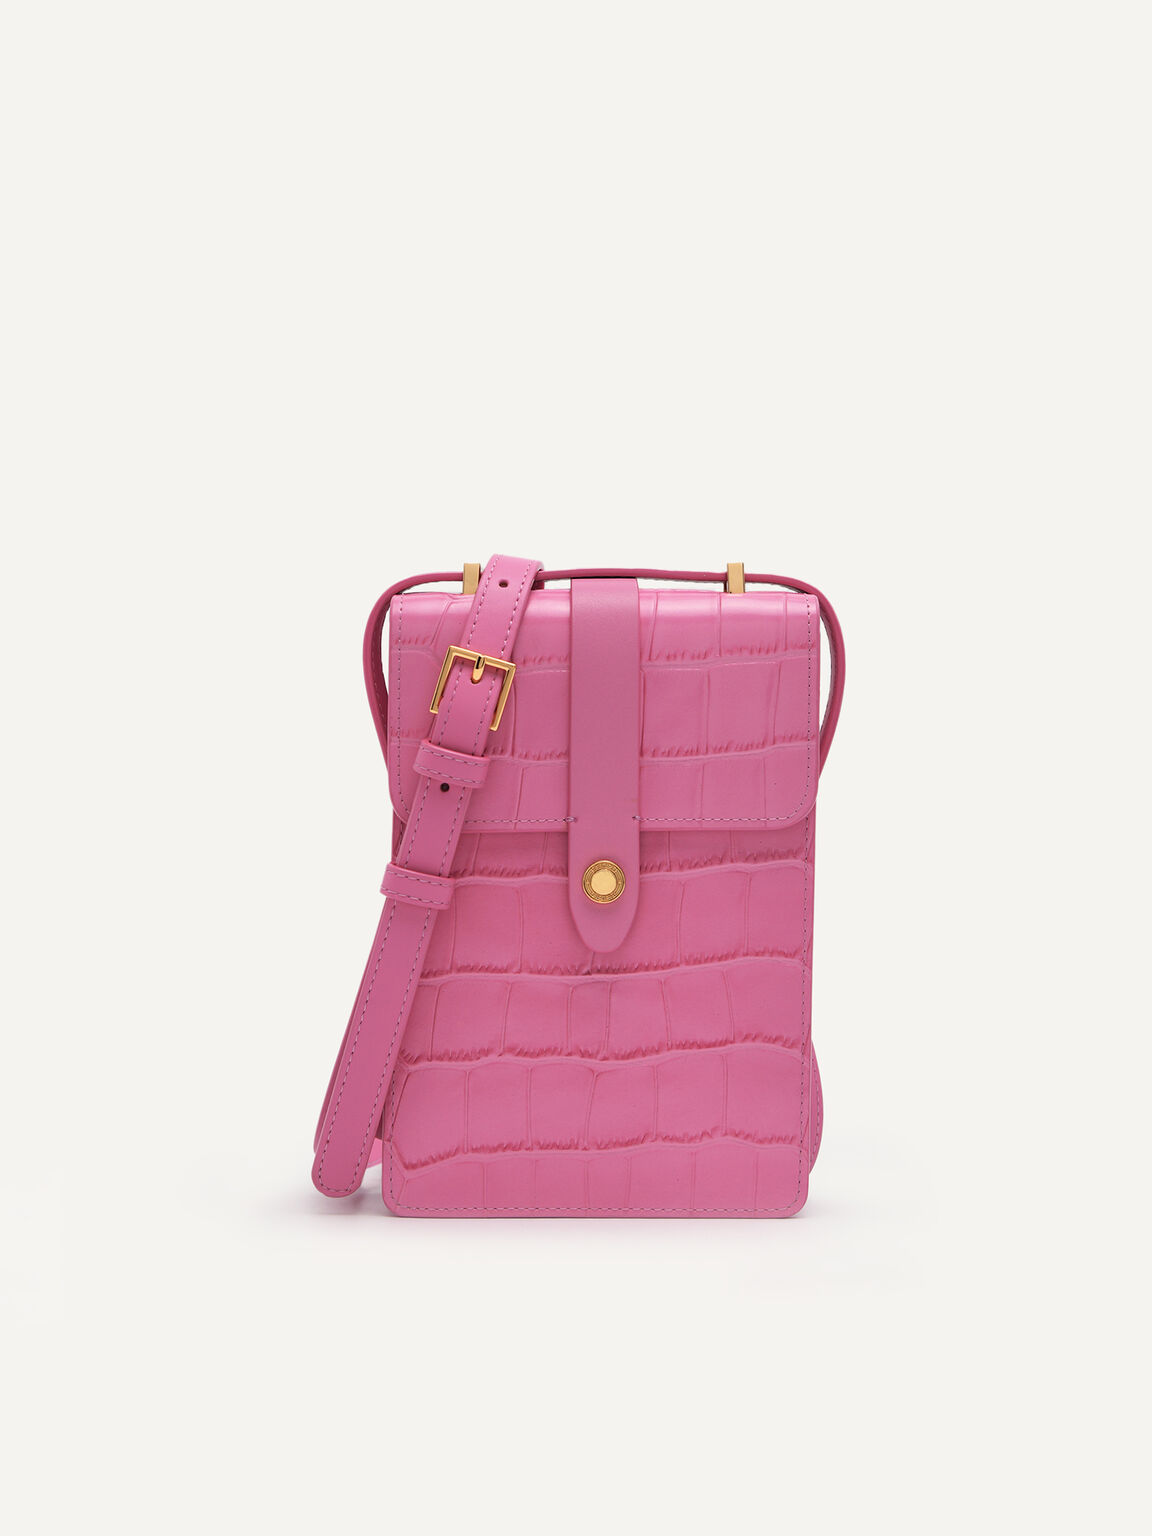 Leather Croc-Effect Mobile Phone Bag, Pink